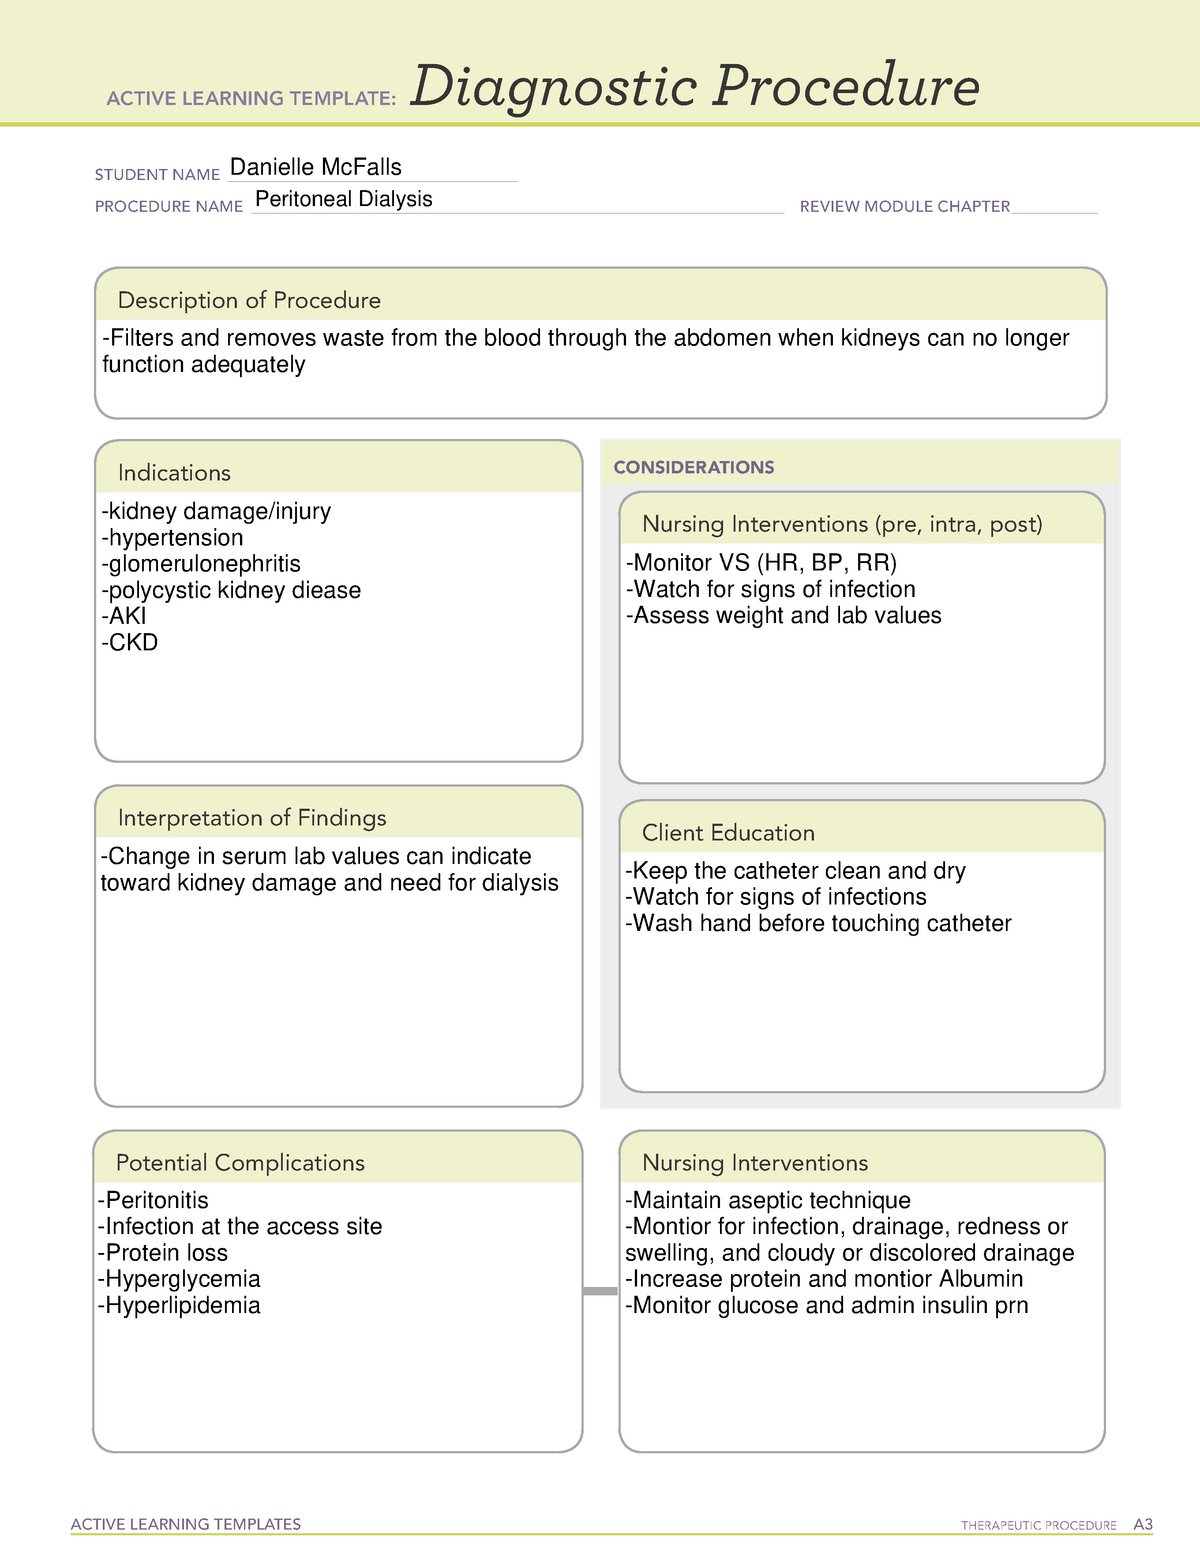 peritoneal-dialysis-template-active-learning-templates-therapeutic